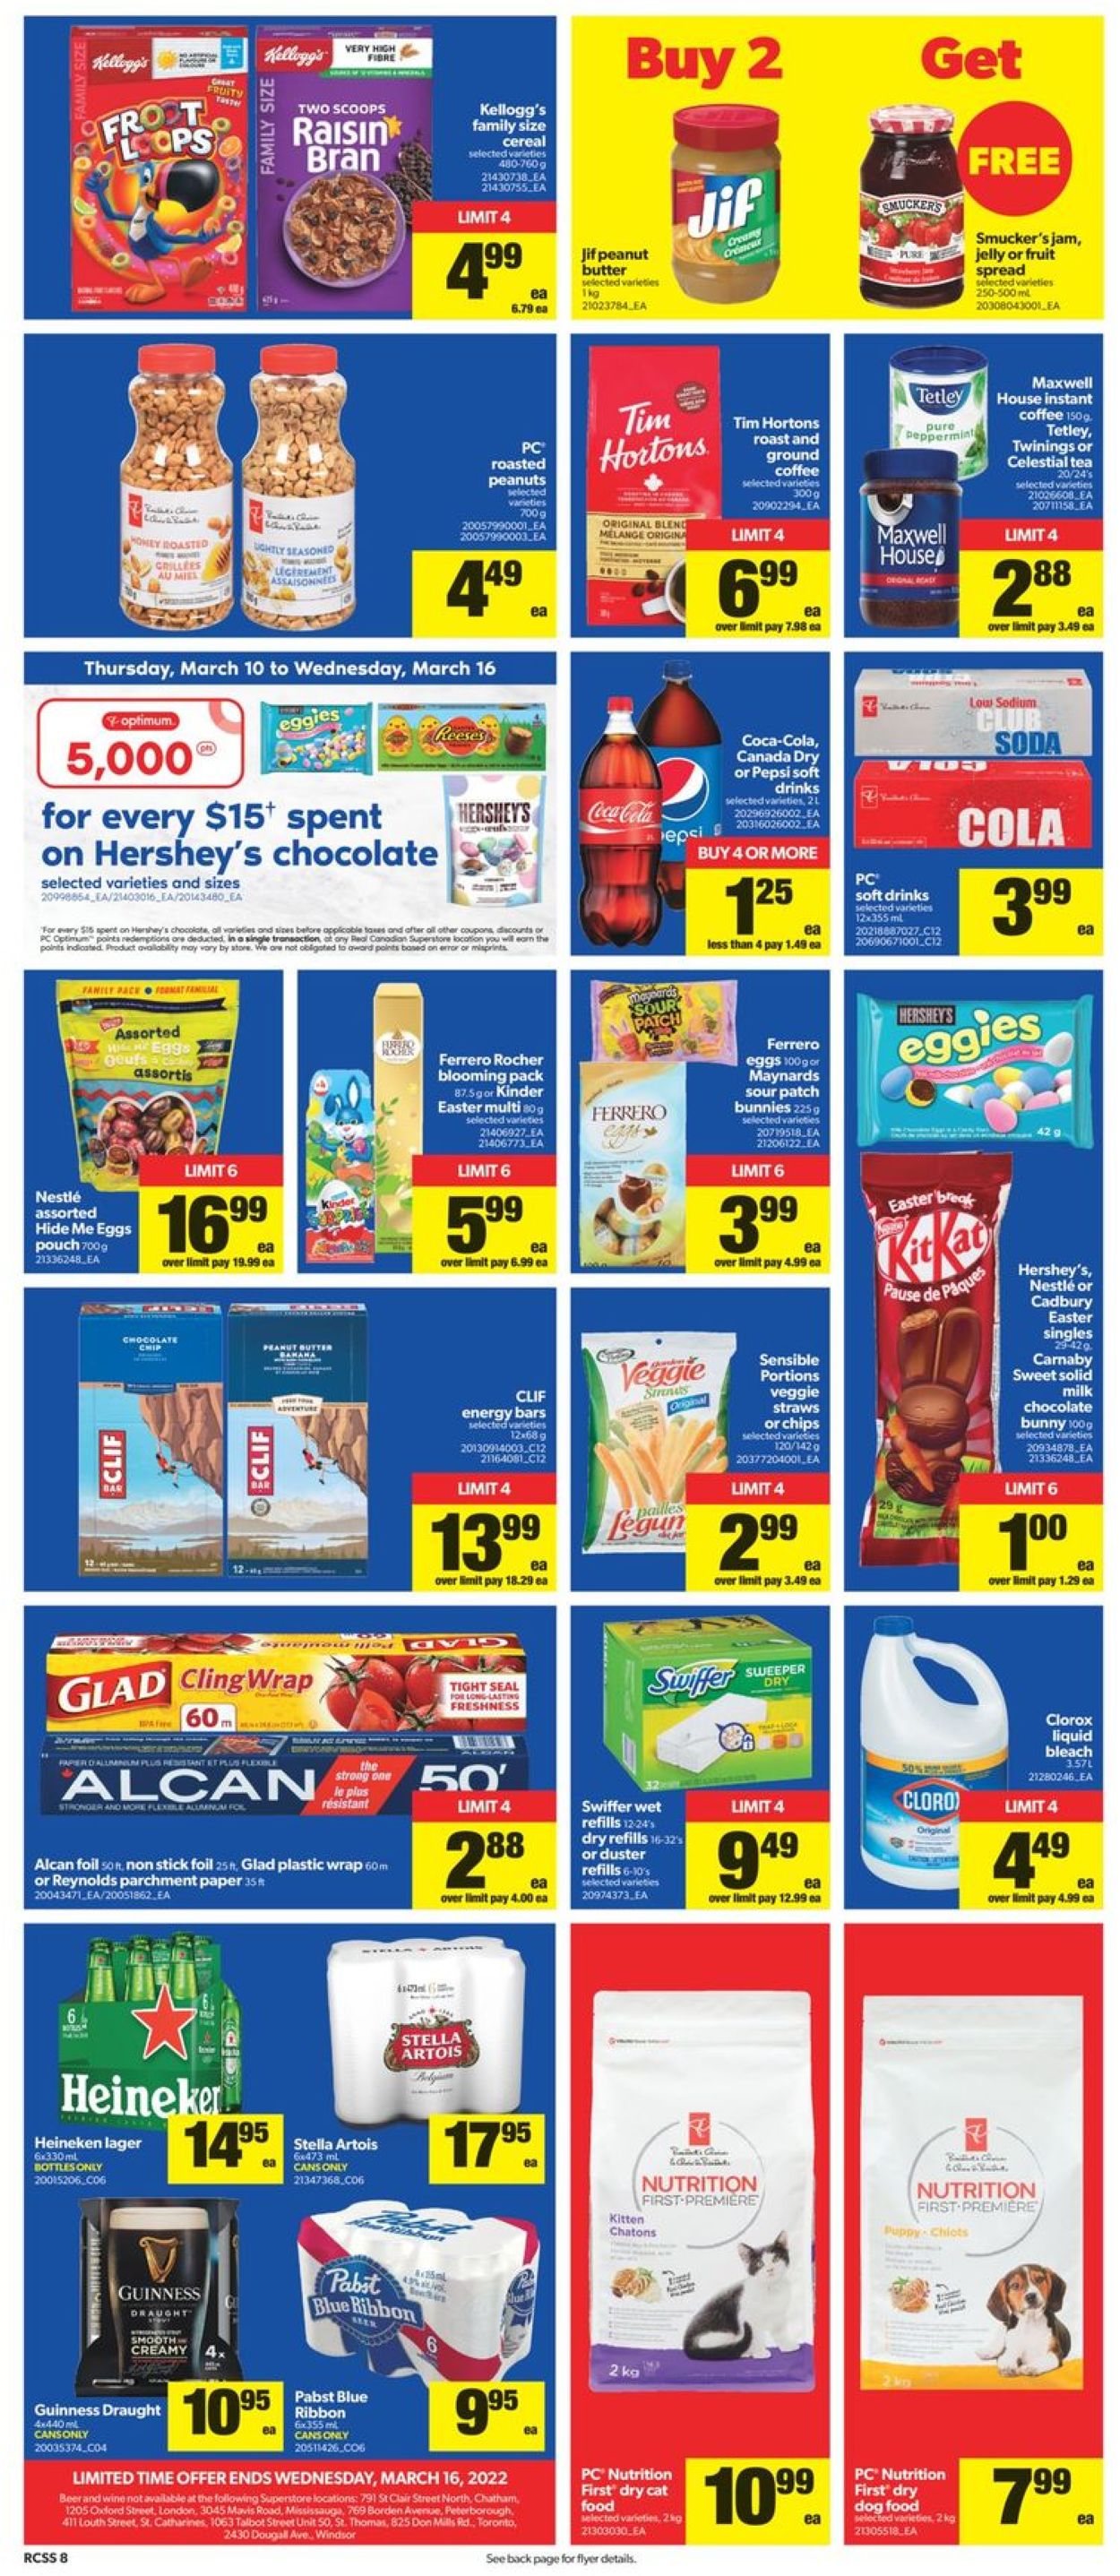 Real Canadian Superstore Flyer from 03/10/2022